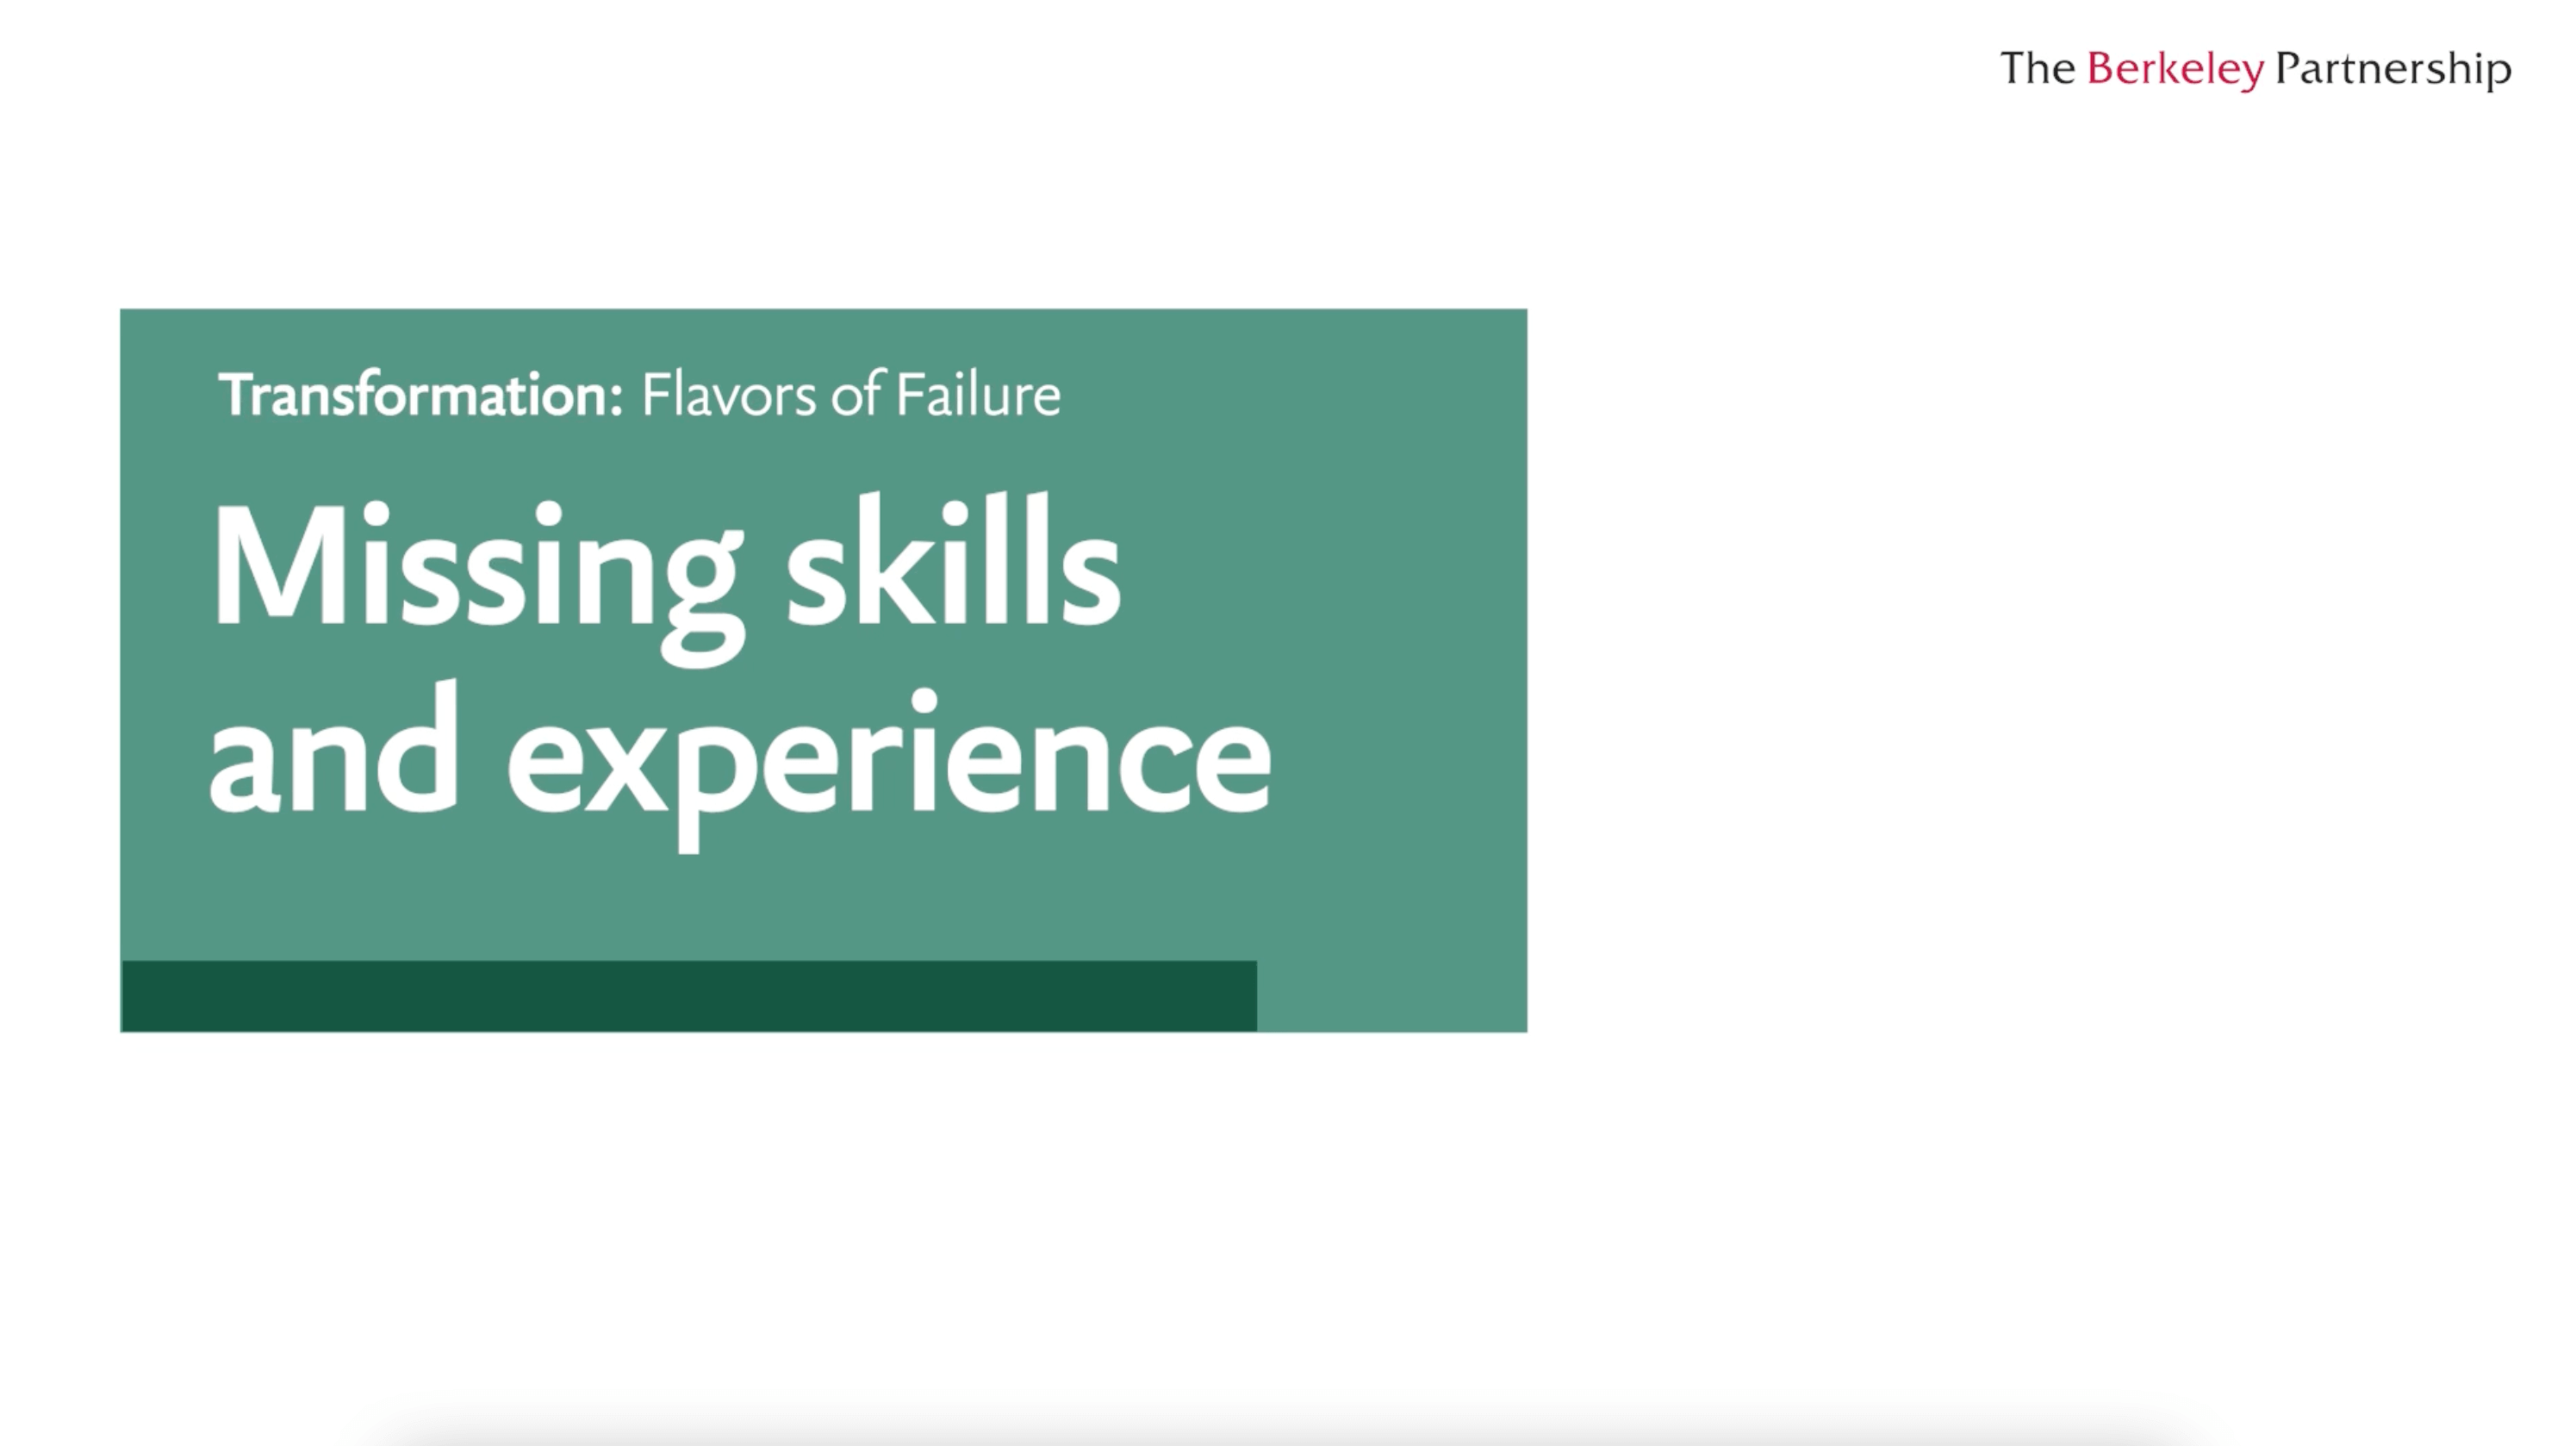 Flavors of failure: Missing skills and experience